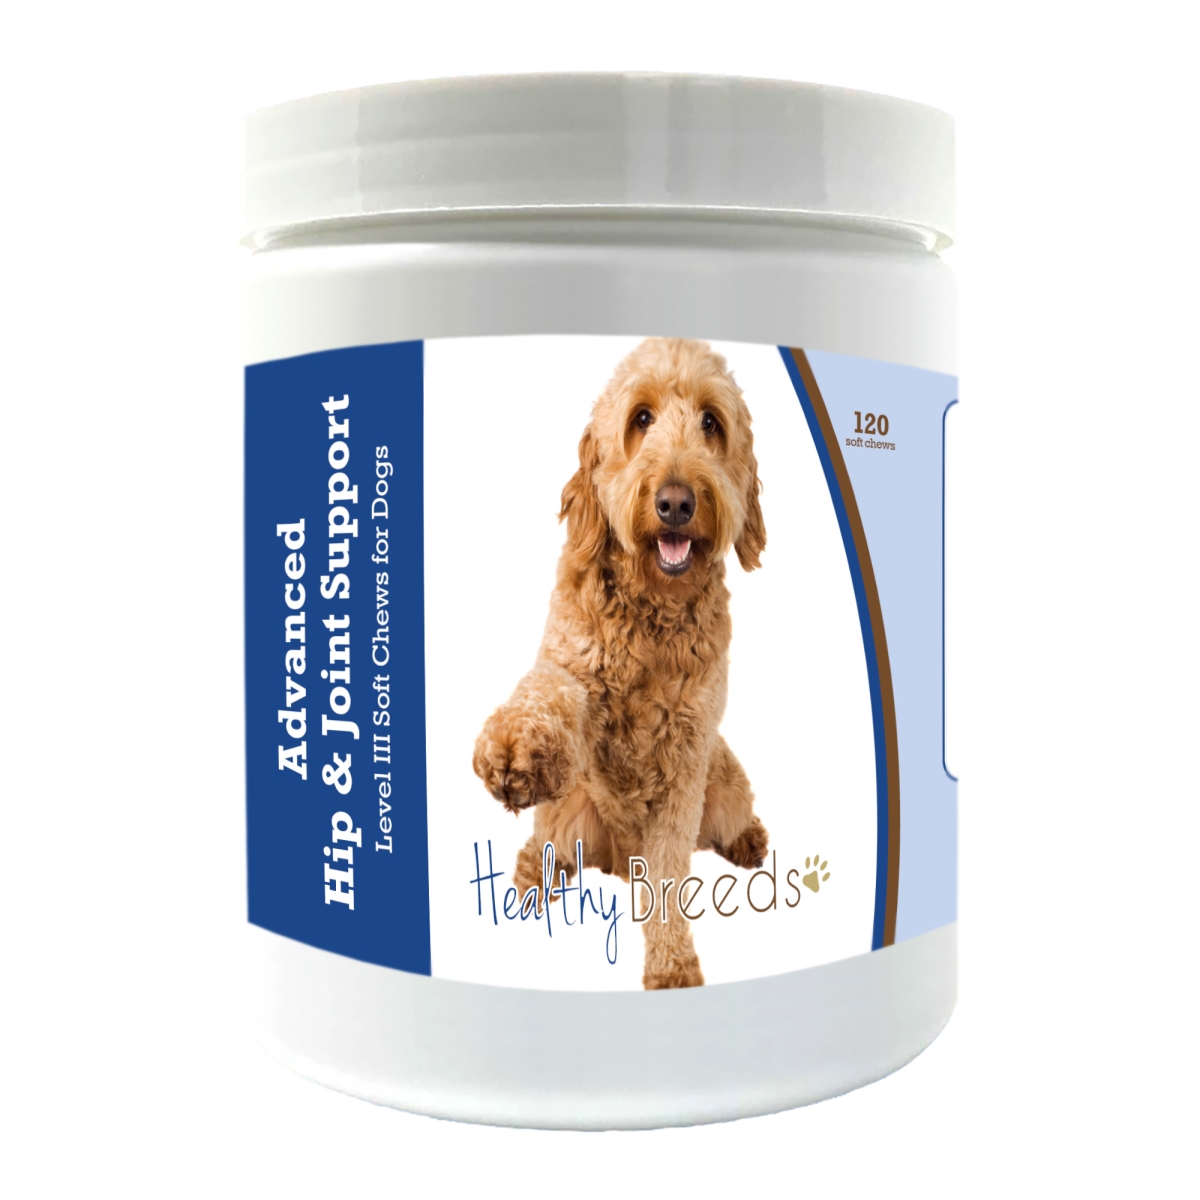 Picture of Healthy Breeds 192959898293 Goldendoodle Advanced Hip & Joint Support Level III Soft Chews for Dogs